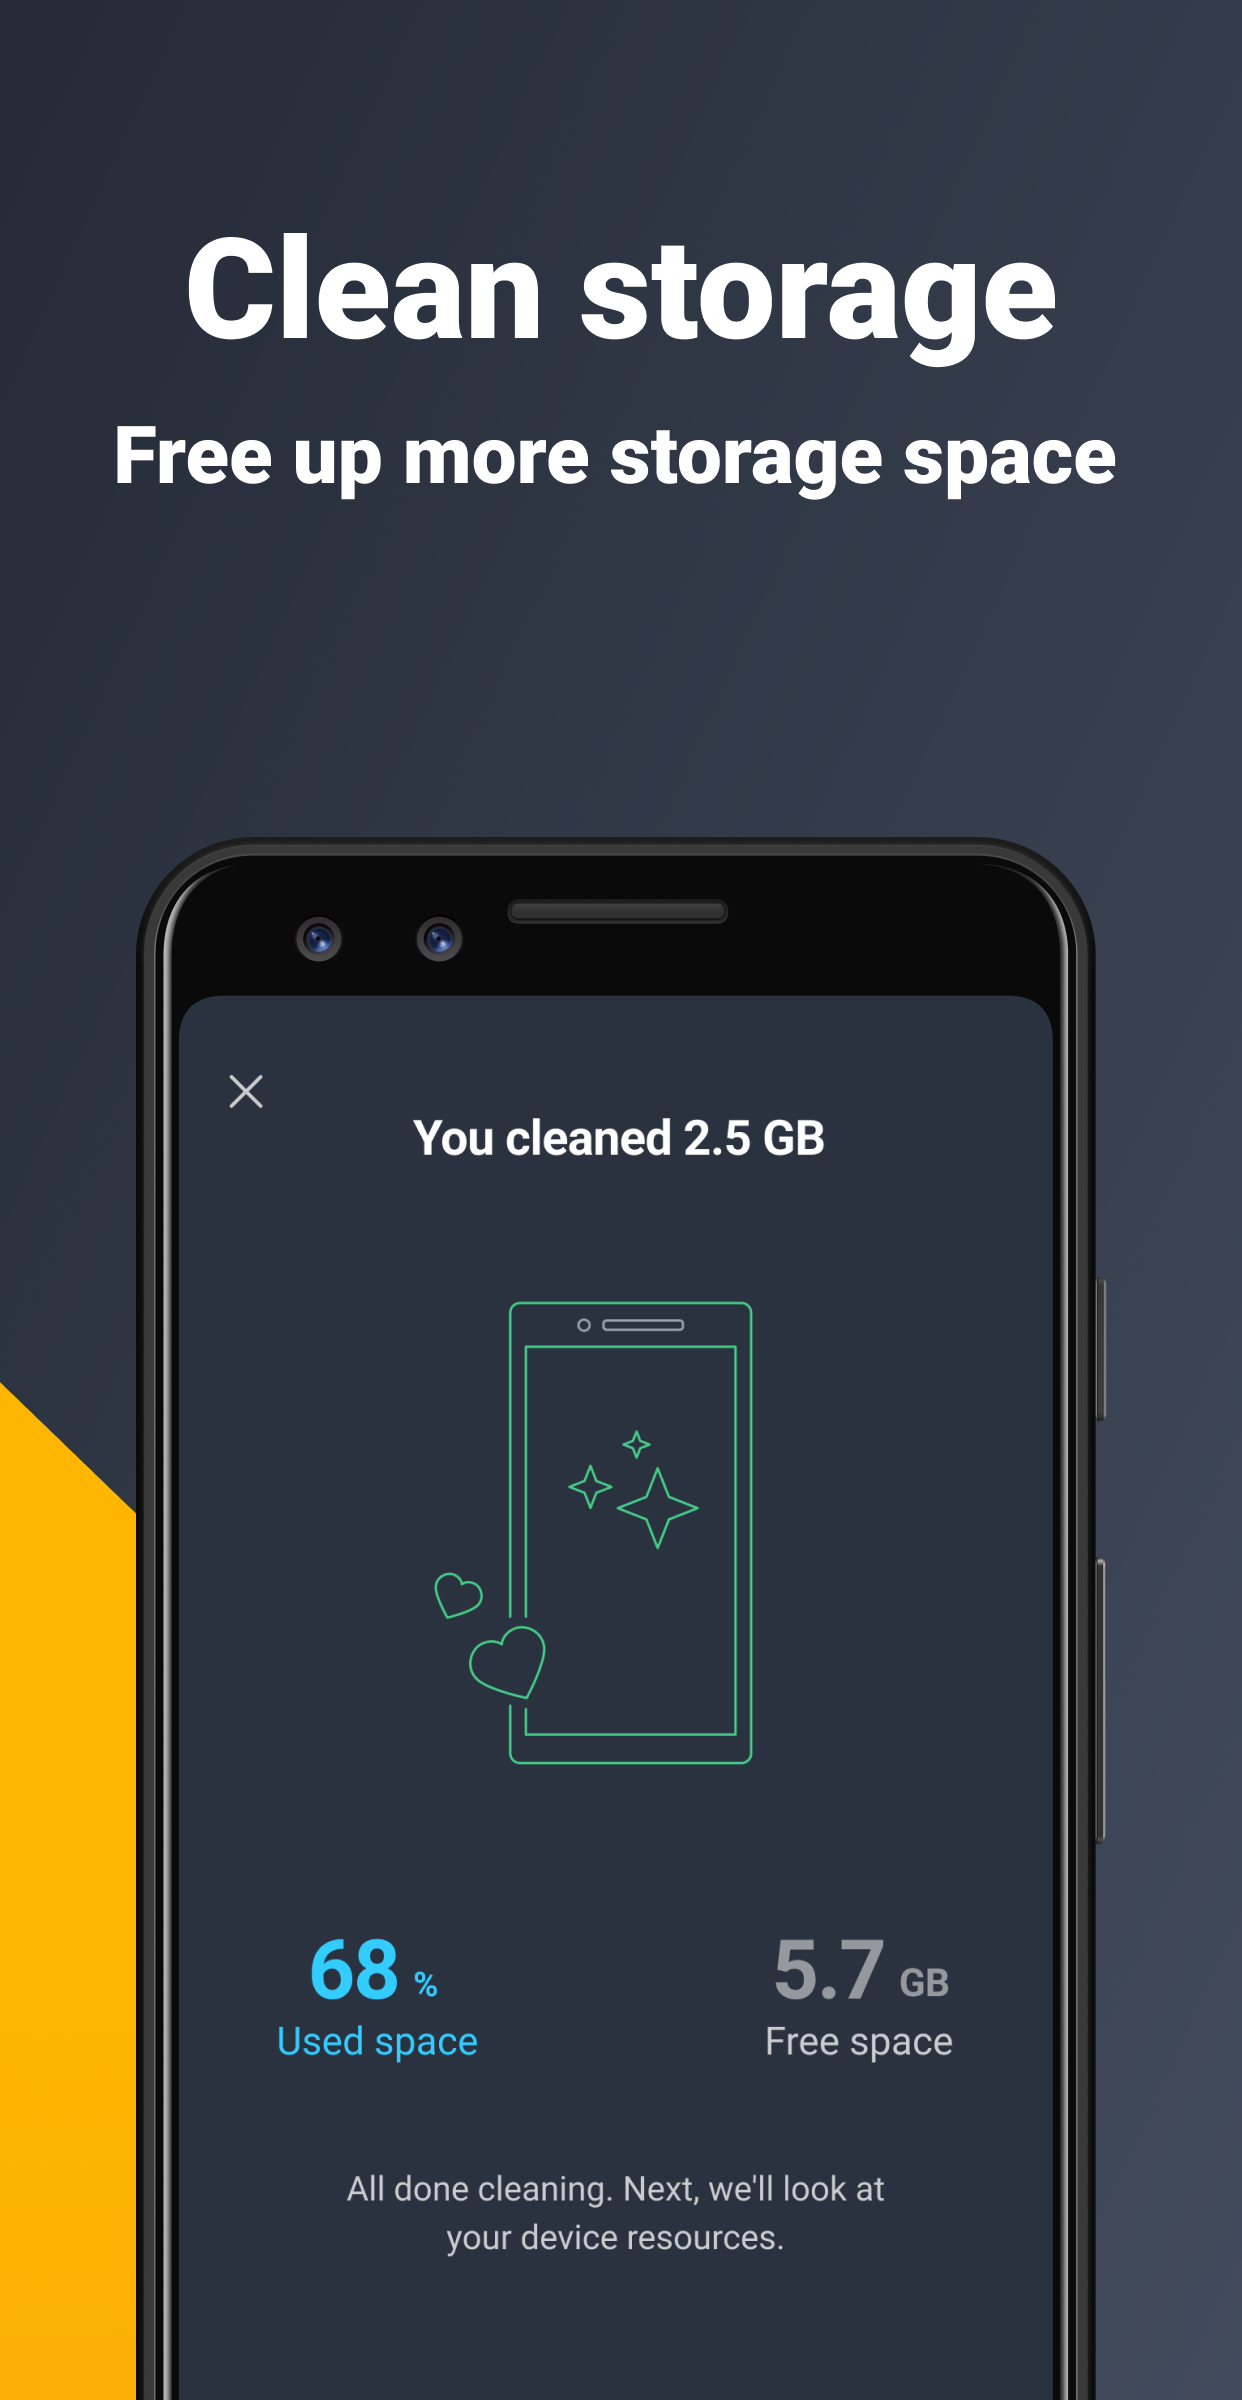 Android application AVG Cleaner – Storage Cleaner screenshort